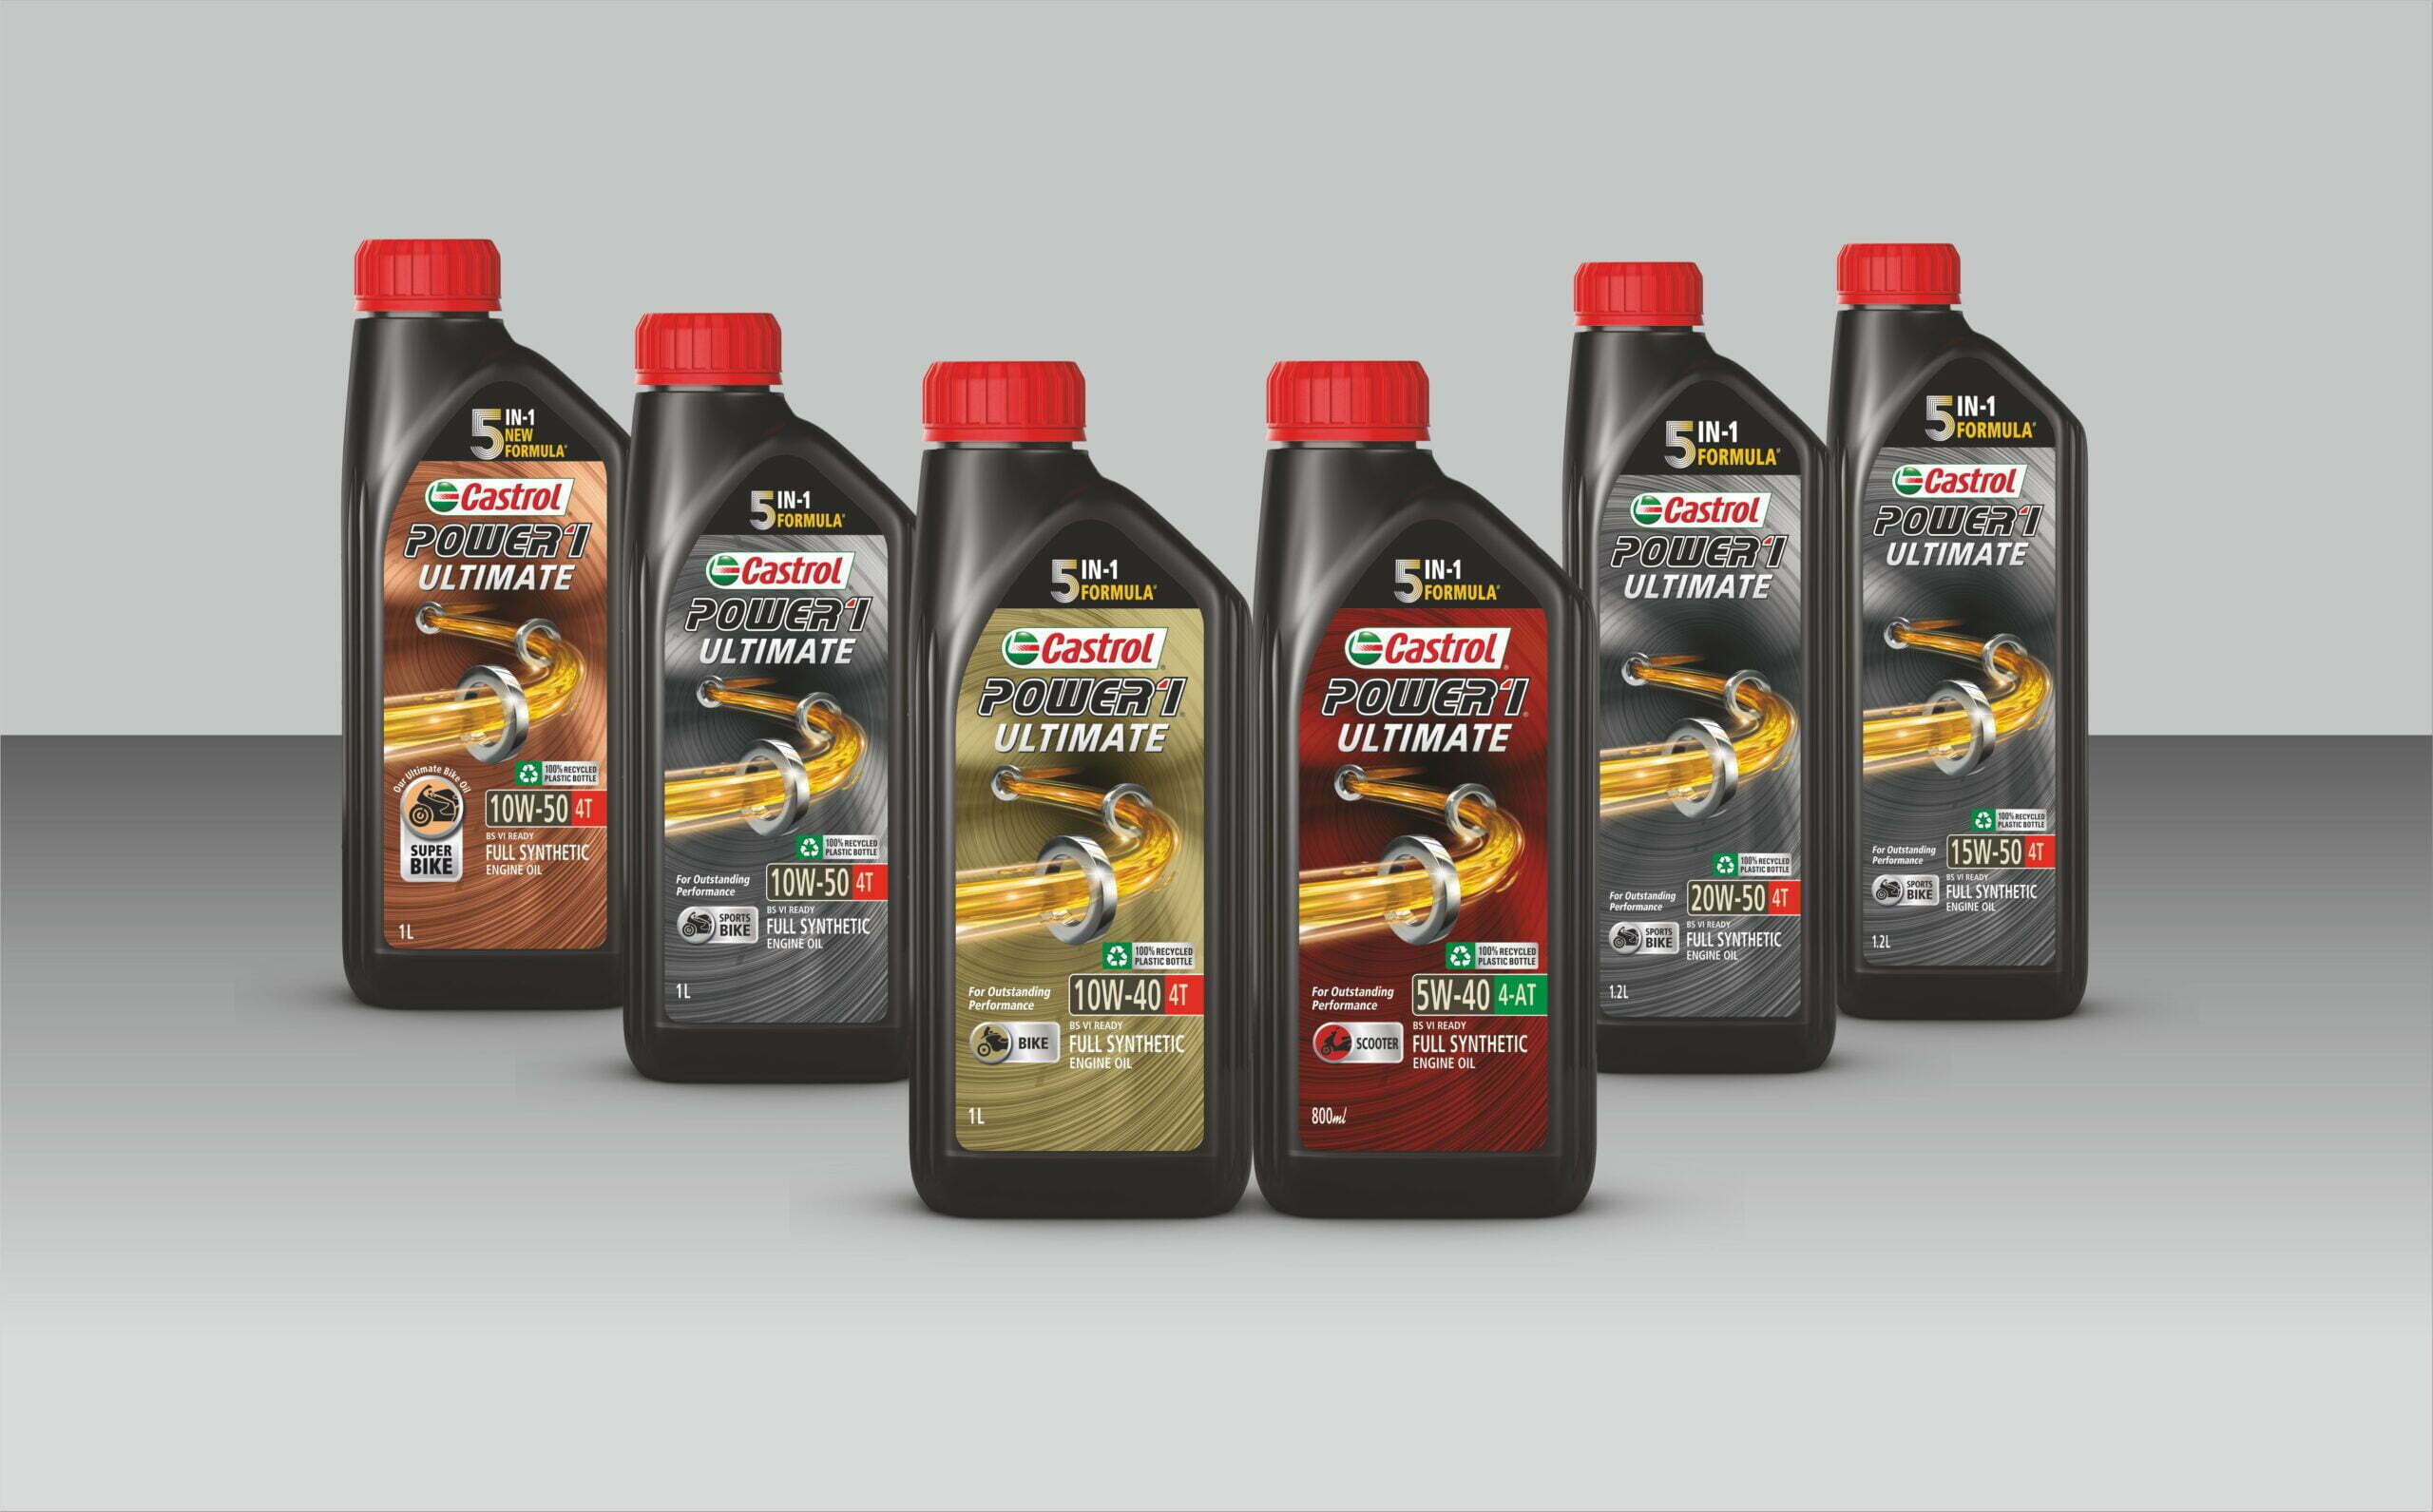 Castrol India Introduces 100% Recycled Bottle